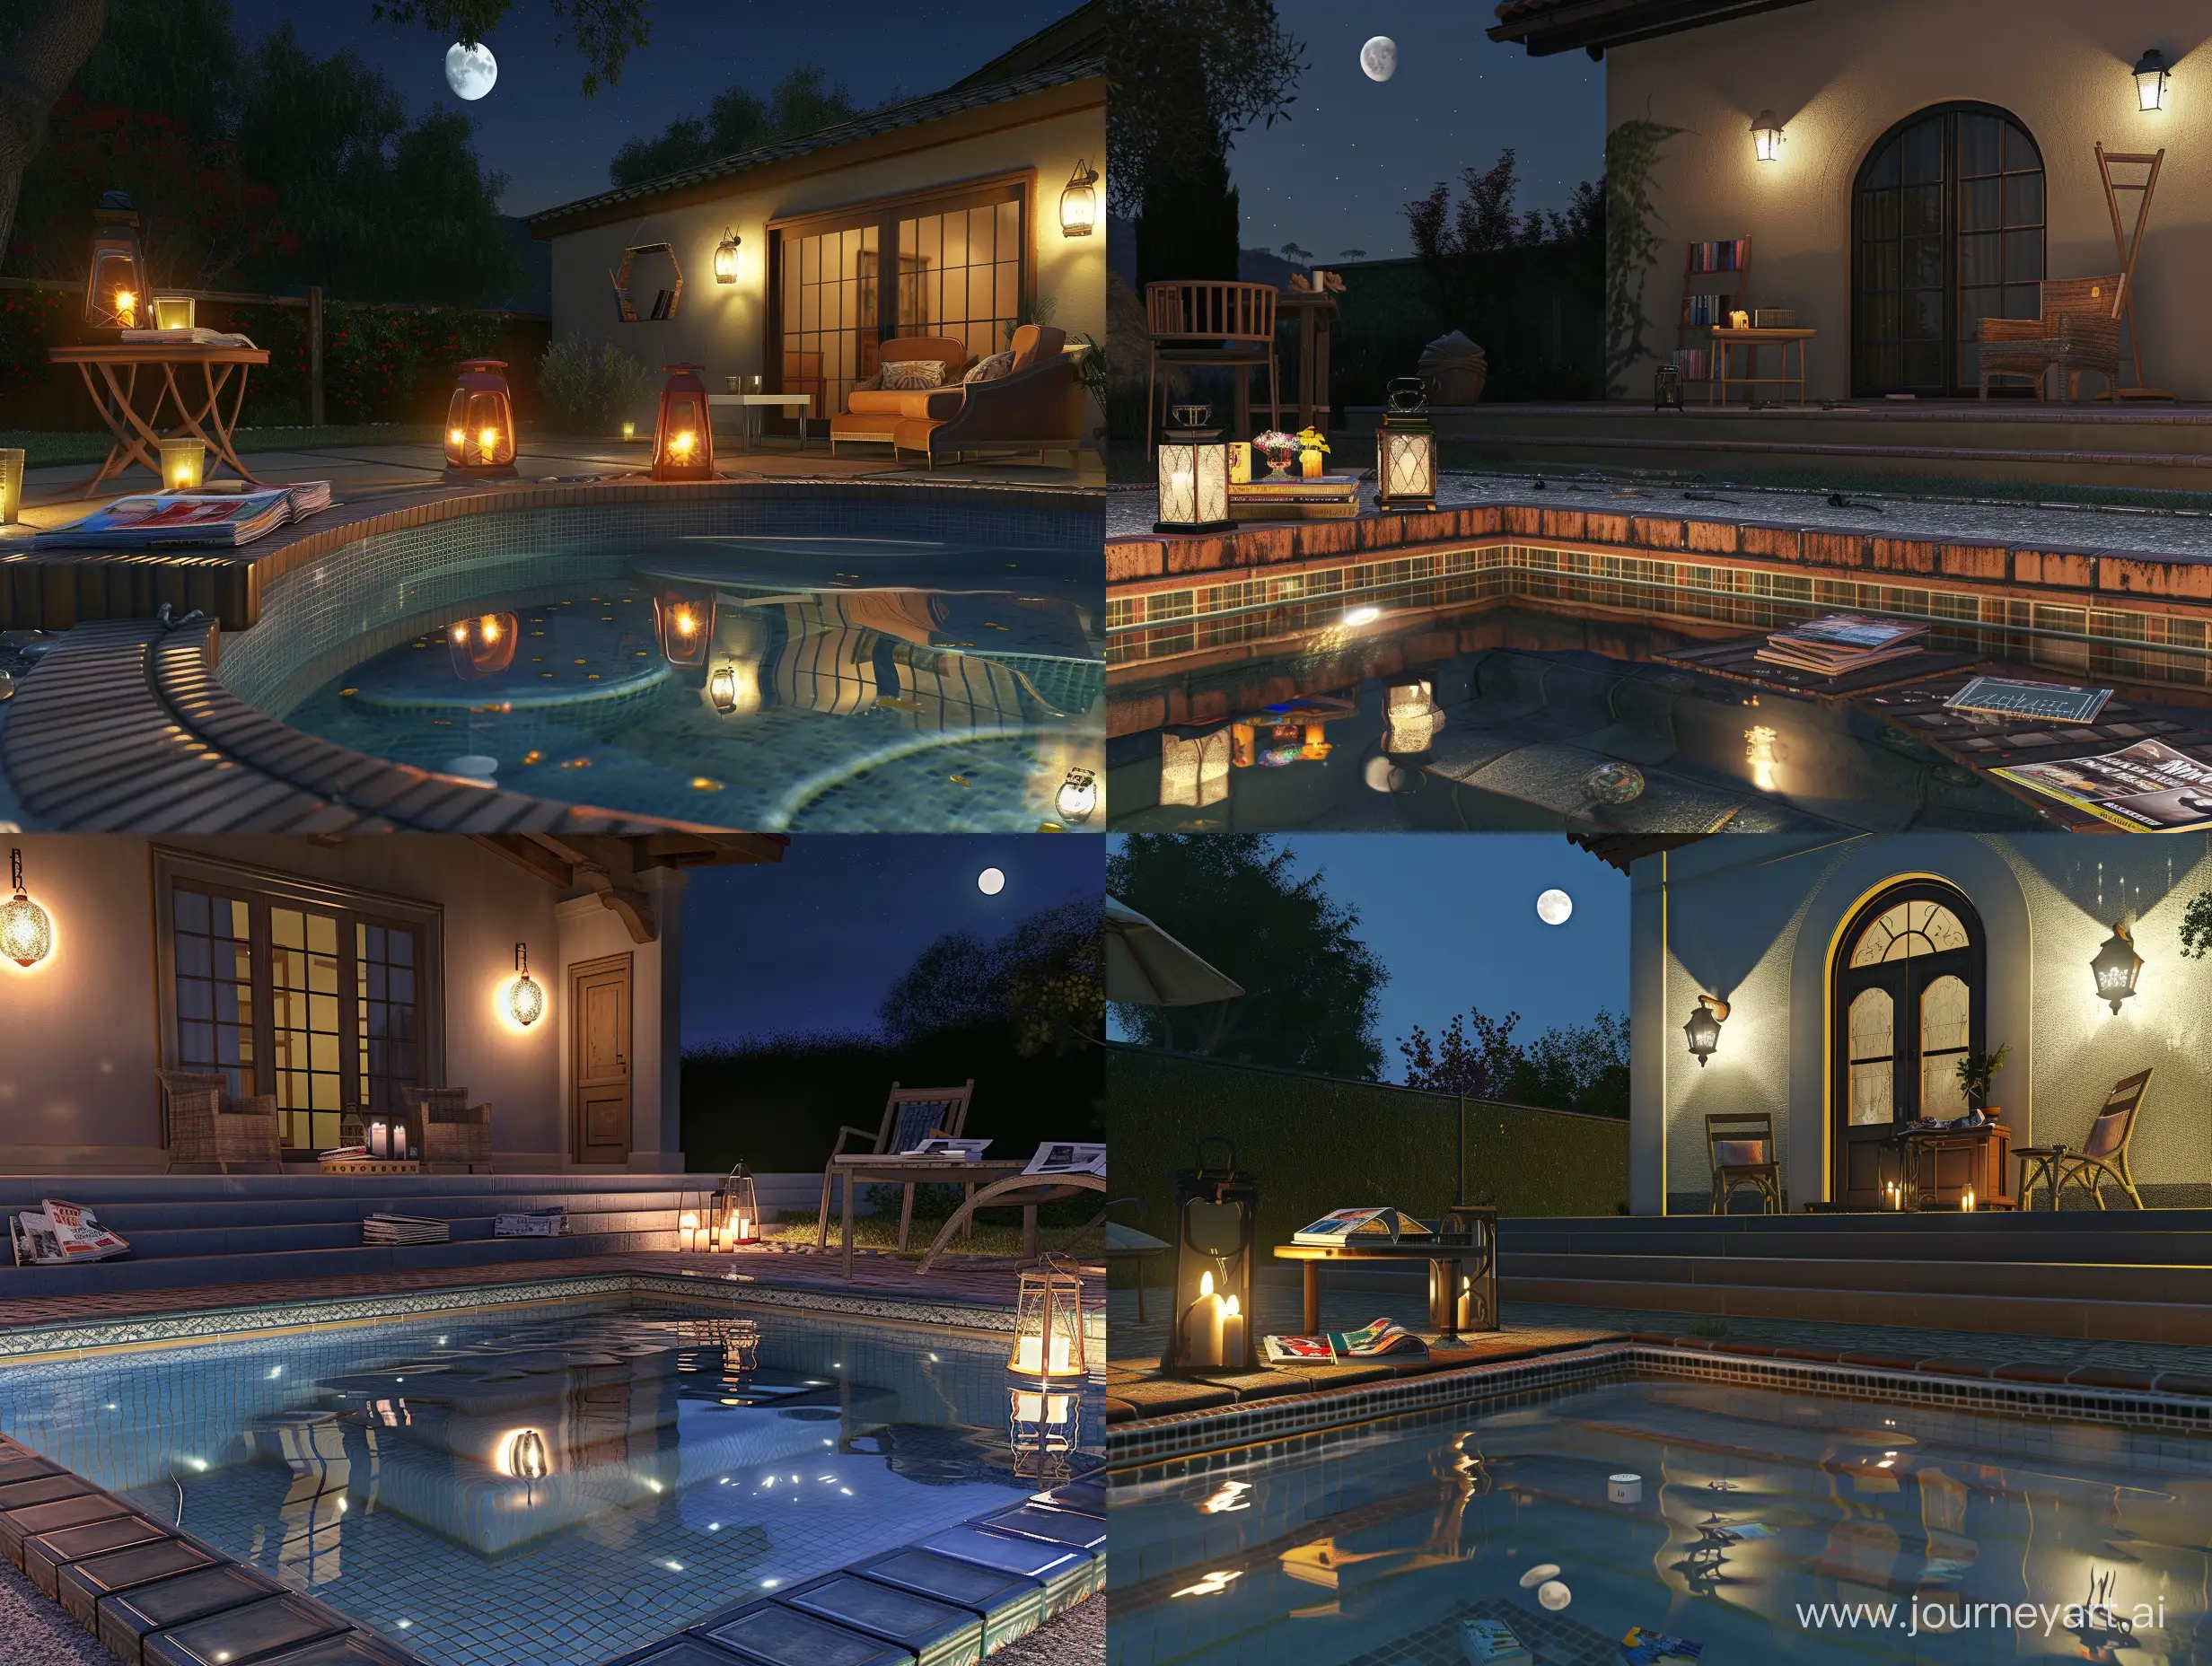 Tranquil-Night-Scene-American-Style-House-with-Swimming-Pool-and-Lanternlit-Ambiance